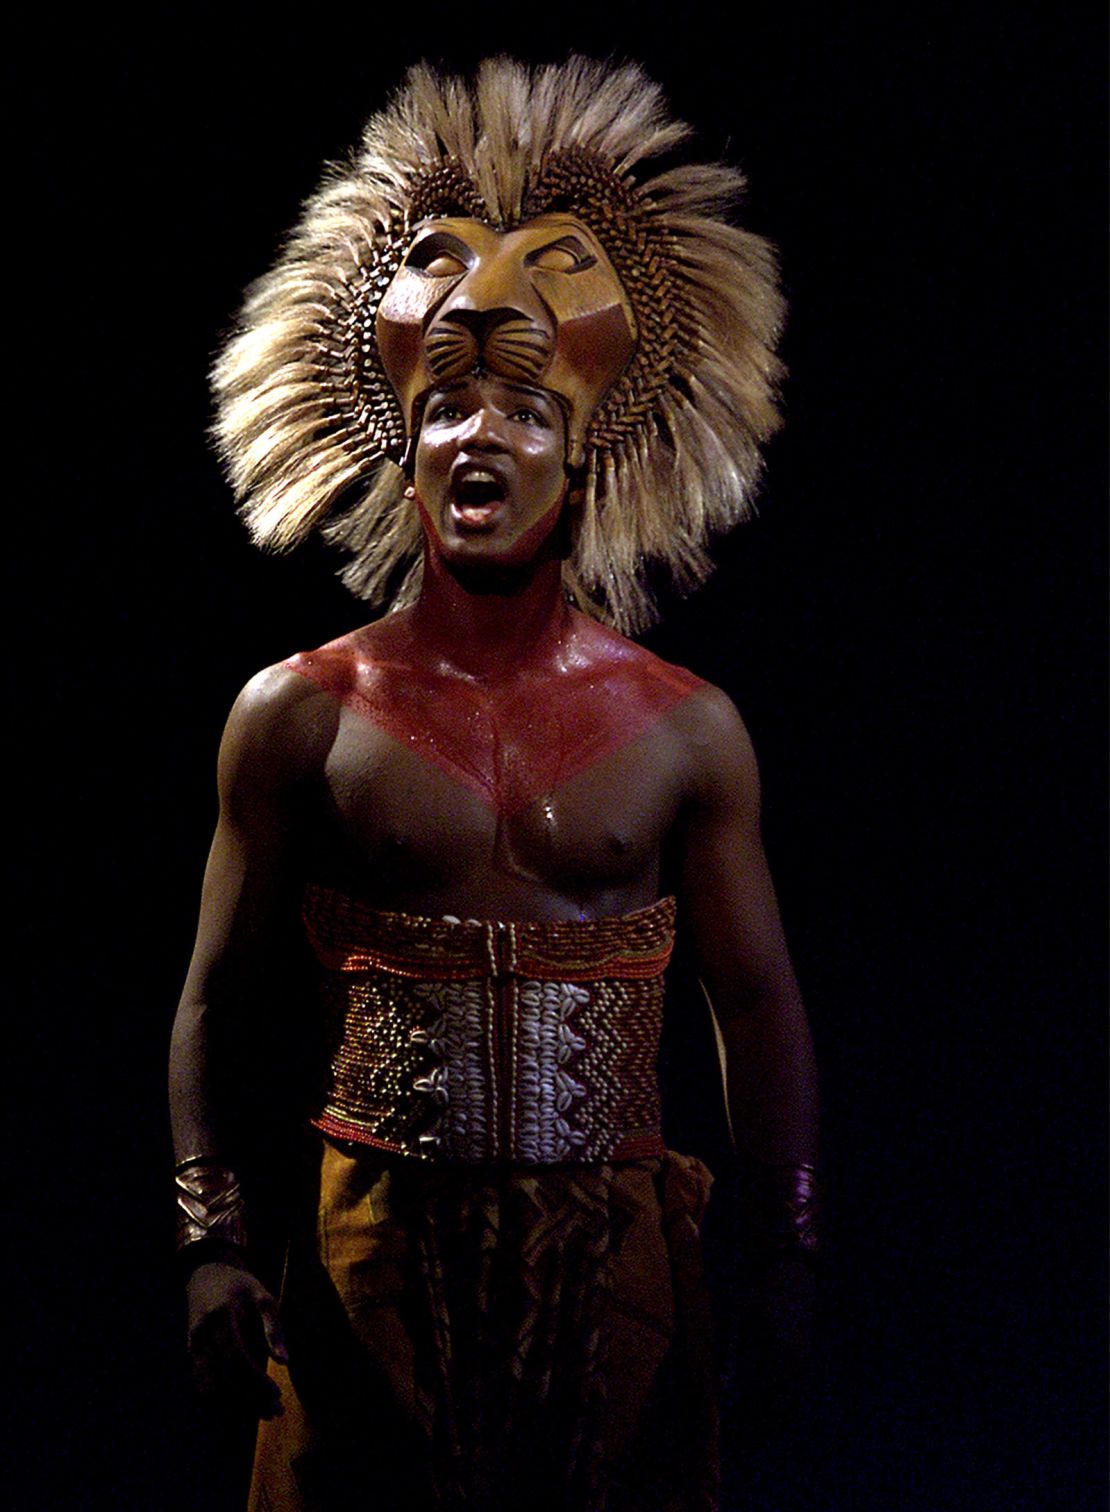 Clifton Oliver performs as Simba in the "Lion King" in Los Angeles on September 28, 2000.